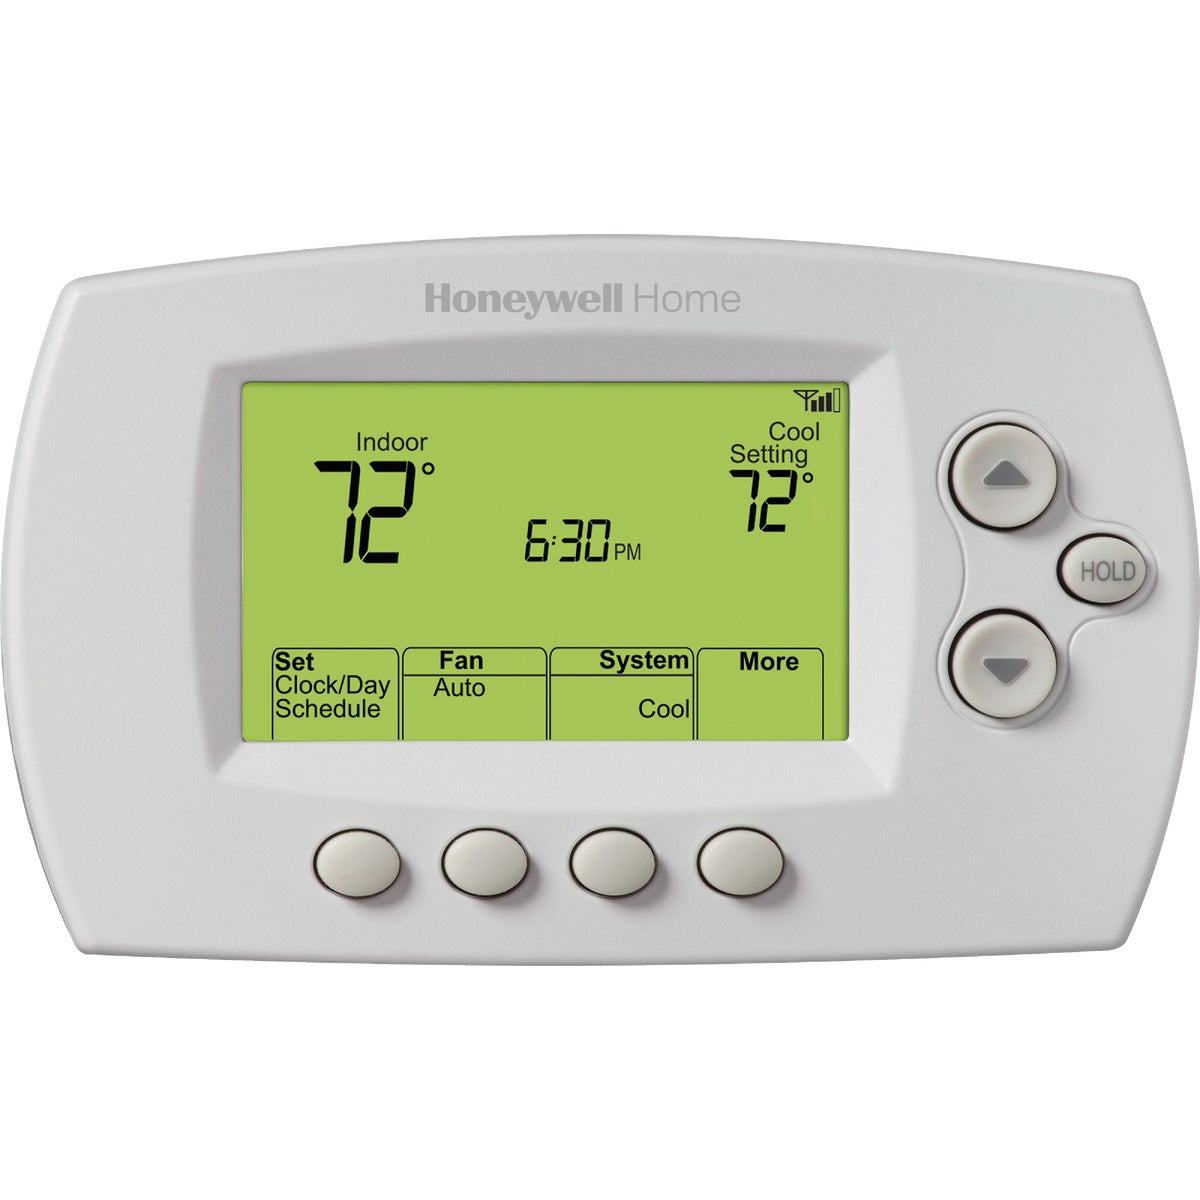 Item 400559, WiFi enabled thermostat allows for remote access via Smartphone or computer